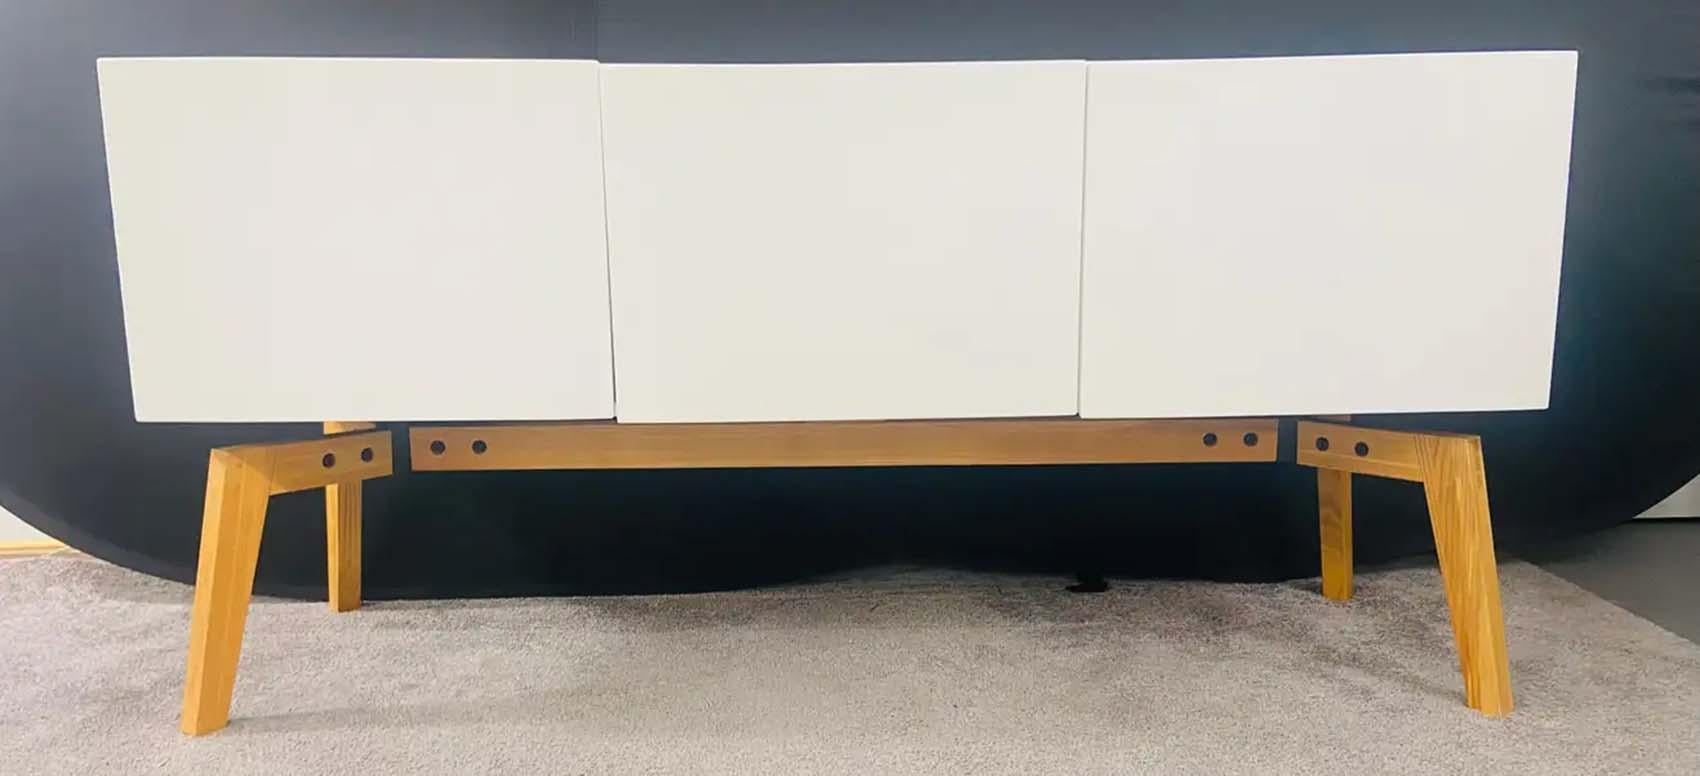 A stylish Mid- Century Modern credenza, sideboard or cabinet featuring three doors opening to reveal plenty of storage space. The credenza is made in lacquered white finish and is resting on four tapered and angled wooden legs. Simple, yet elegant